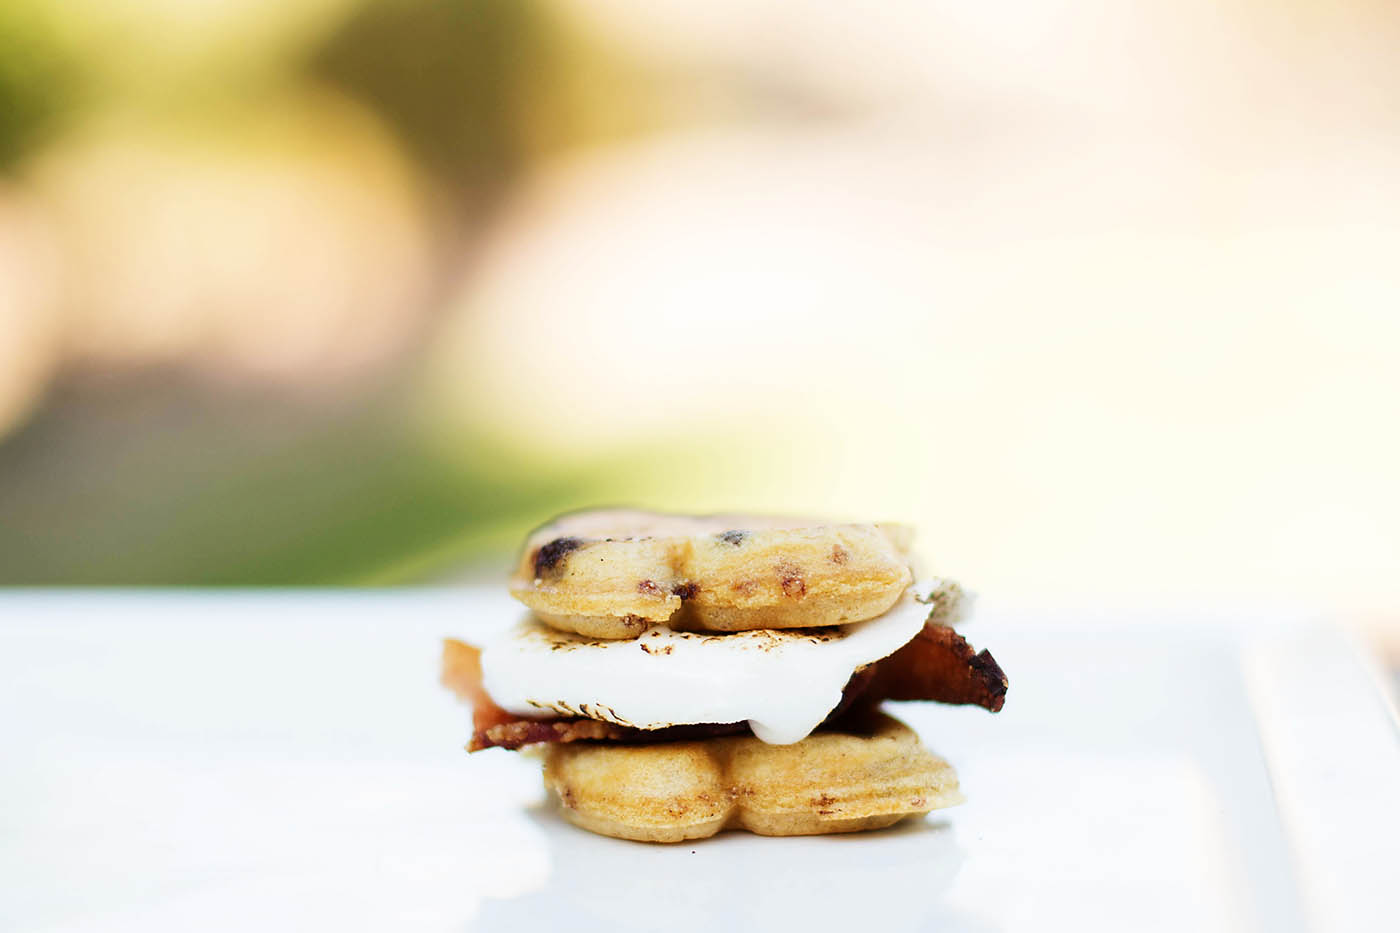 Bacon S'mores with Eggo Choco-Toast - SO good and no hard cookie/cracker to crumble all over the place